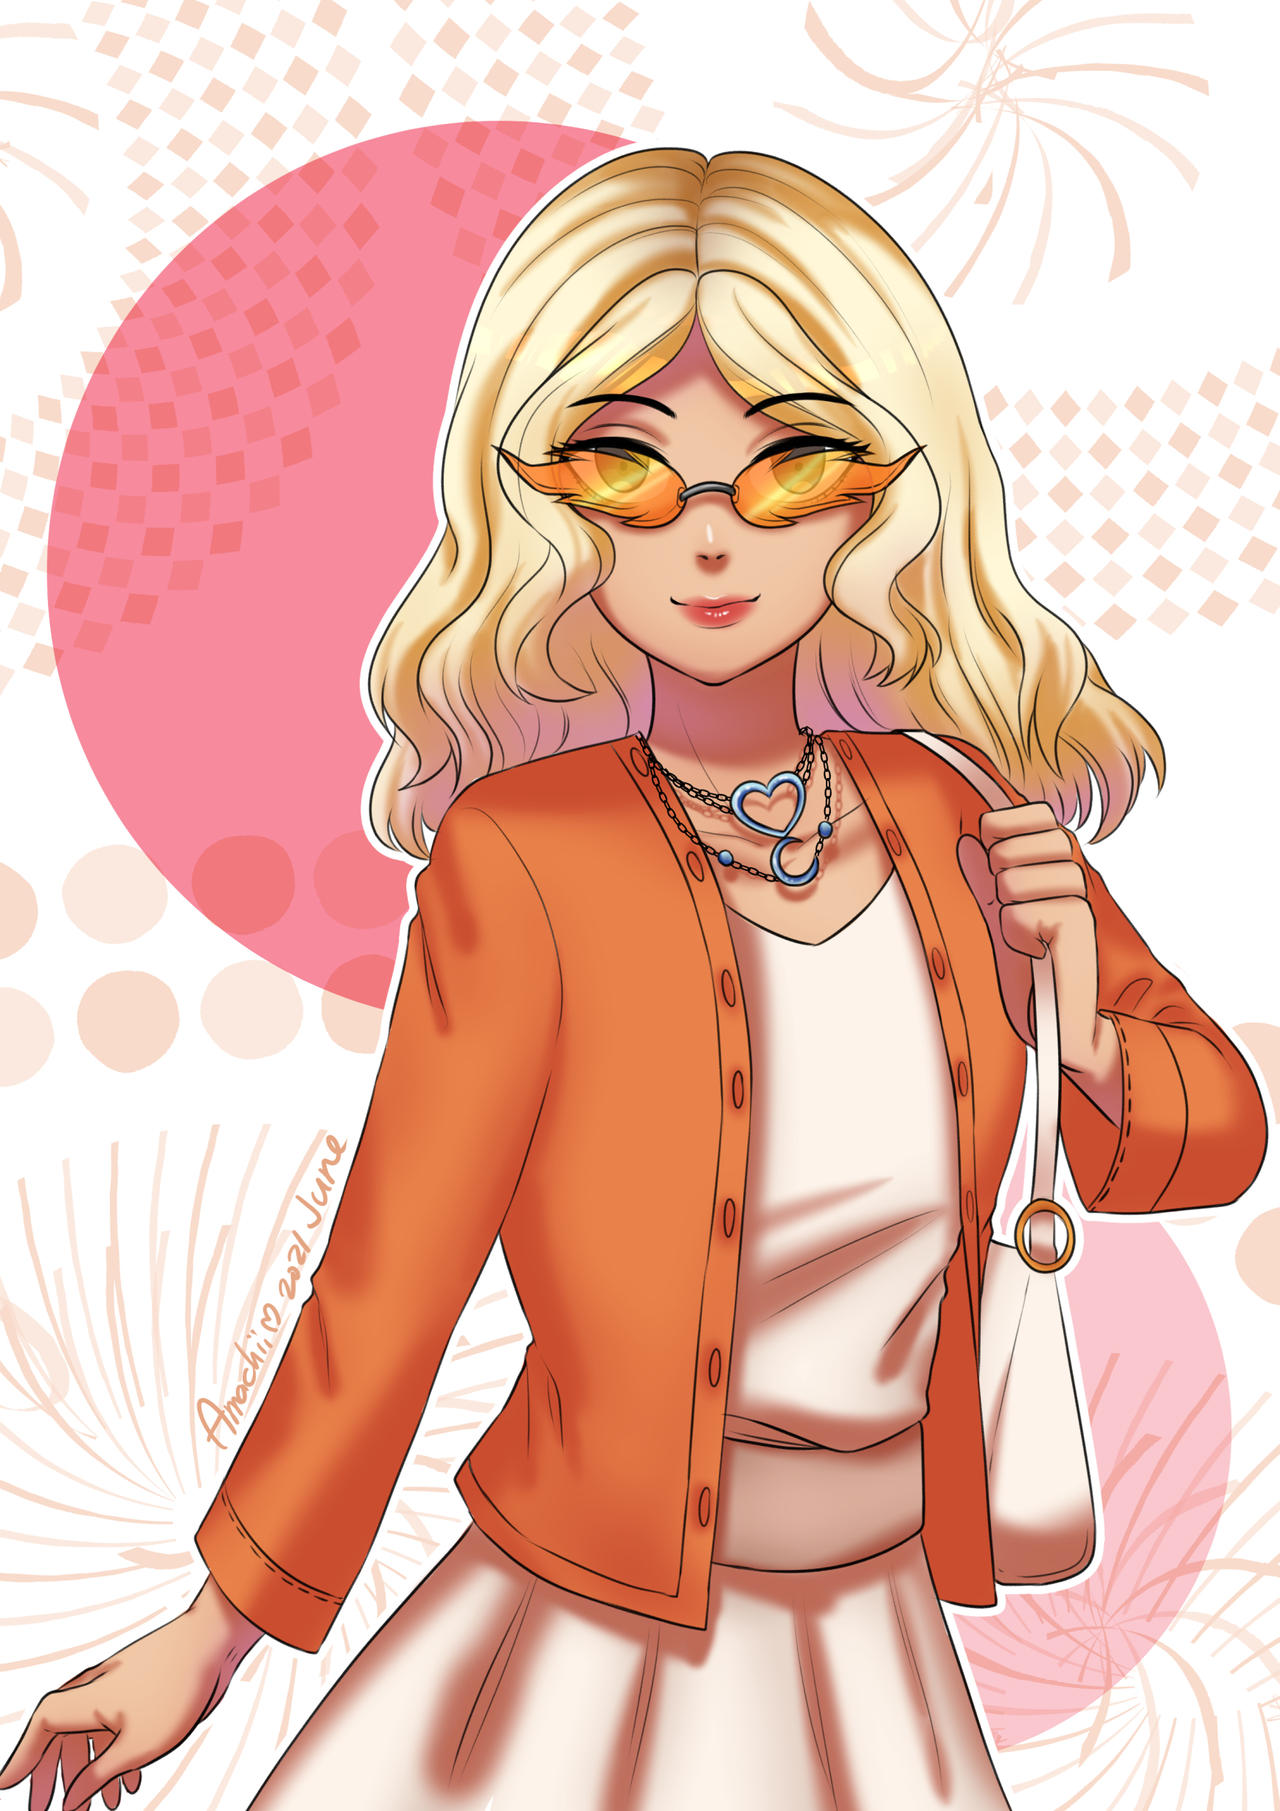 Commission] Roblox Avatar by ama-chii on DeviantArt